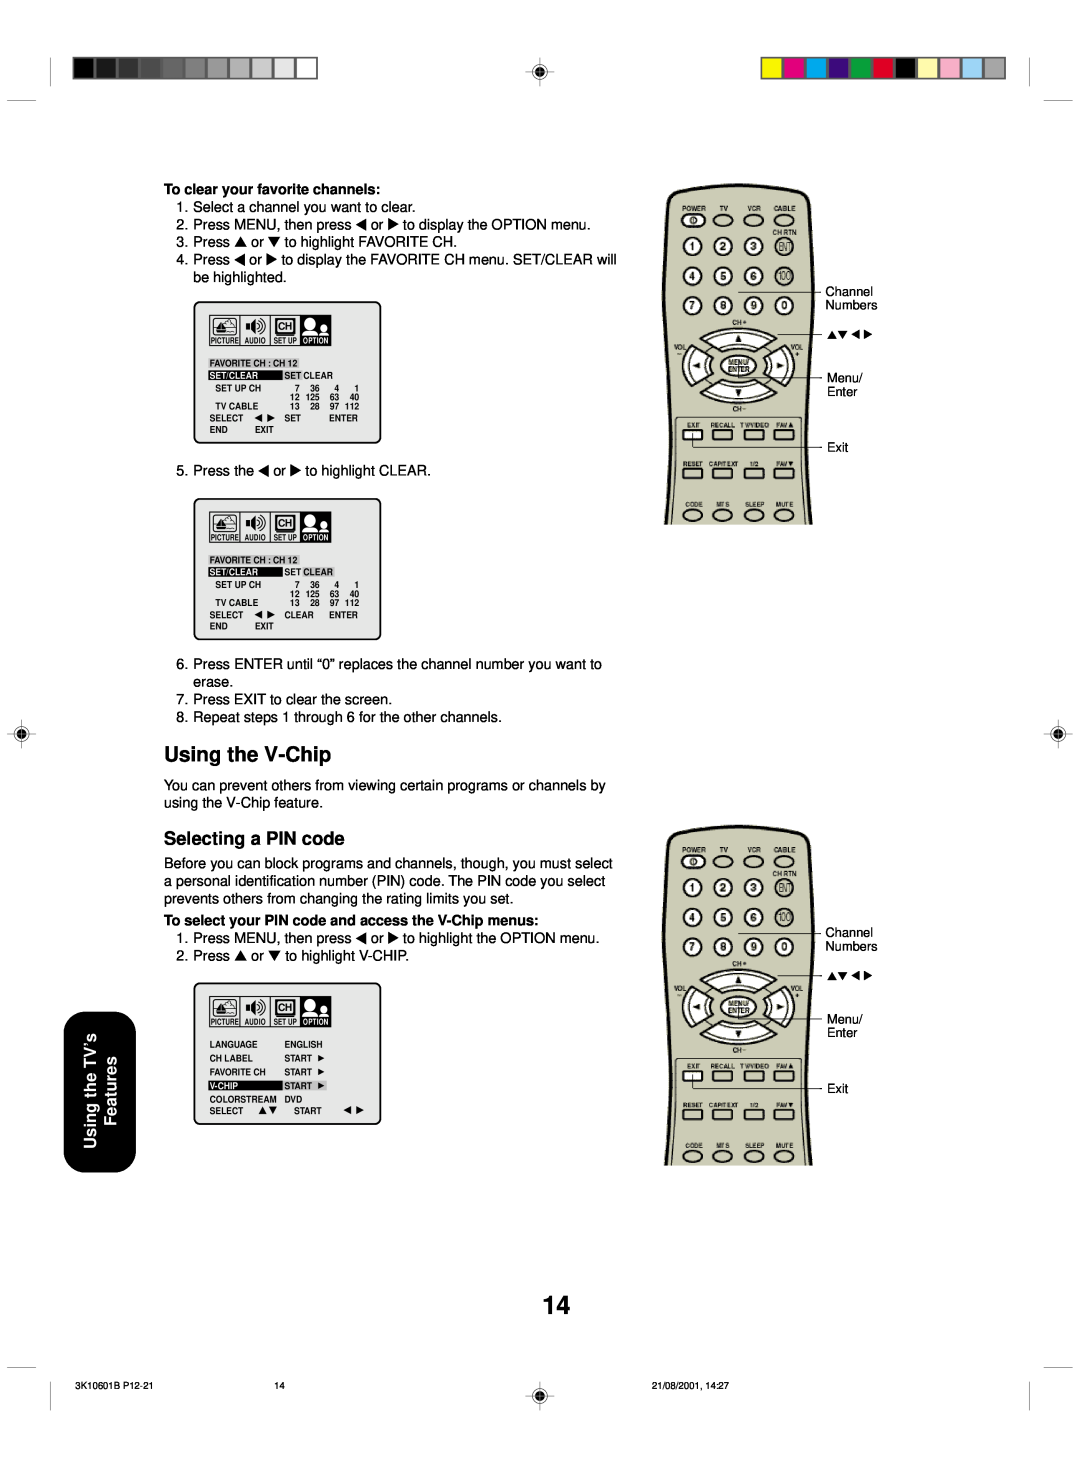 Toshiba 27A41 appendix Using the V-Chip, Selecting a PIN code, To clear your favorite channels 